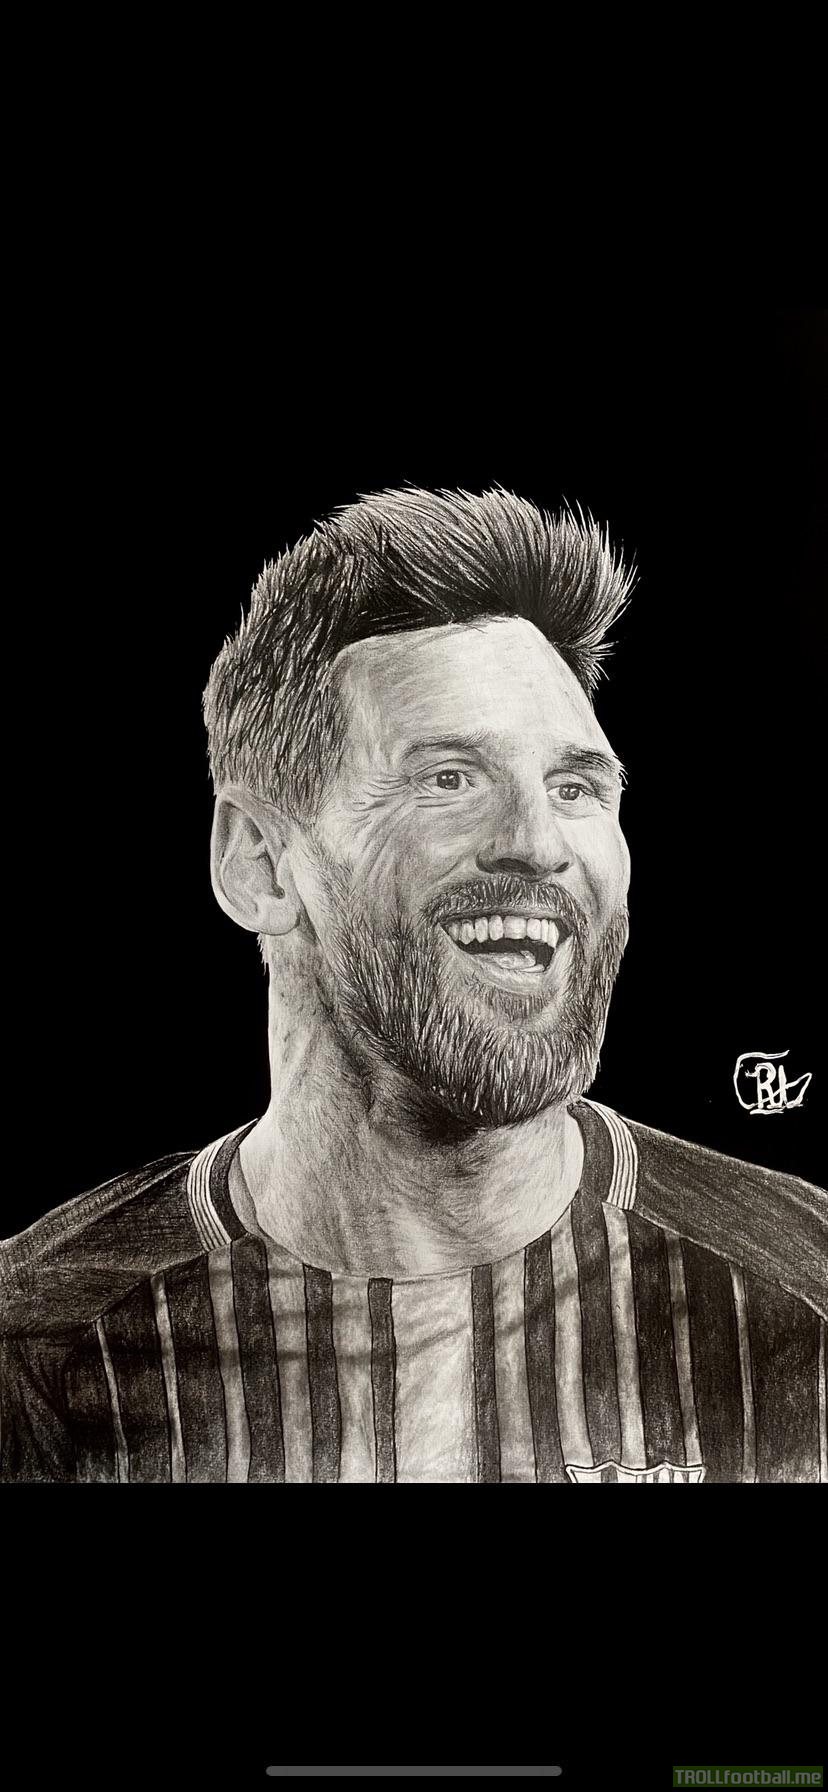 Pencil drawing of the greatest player of all time Lionel Messi done by